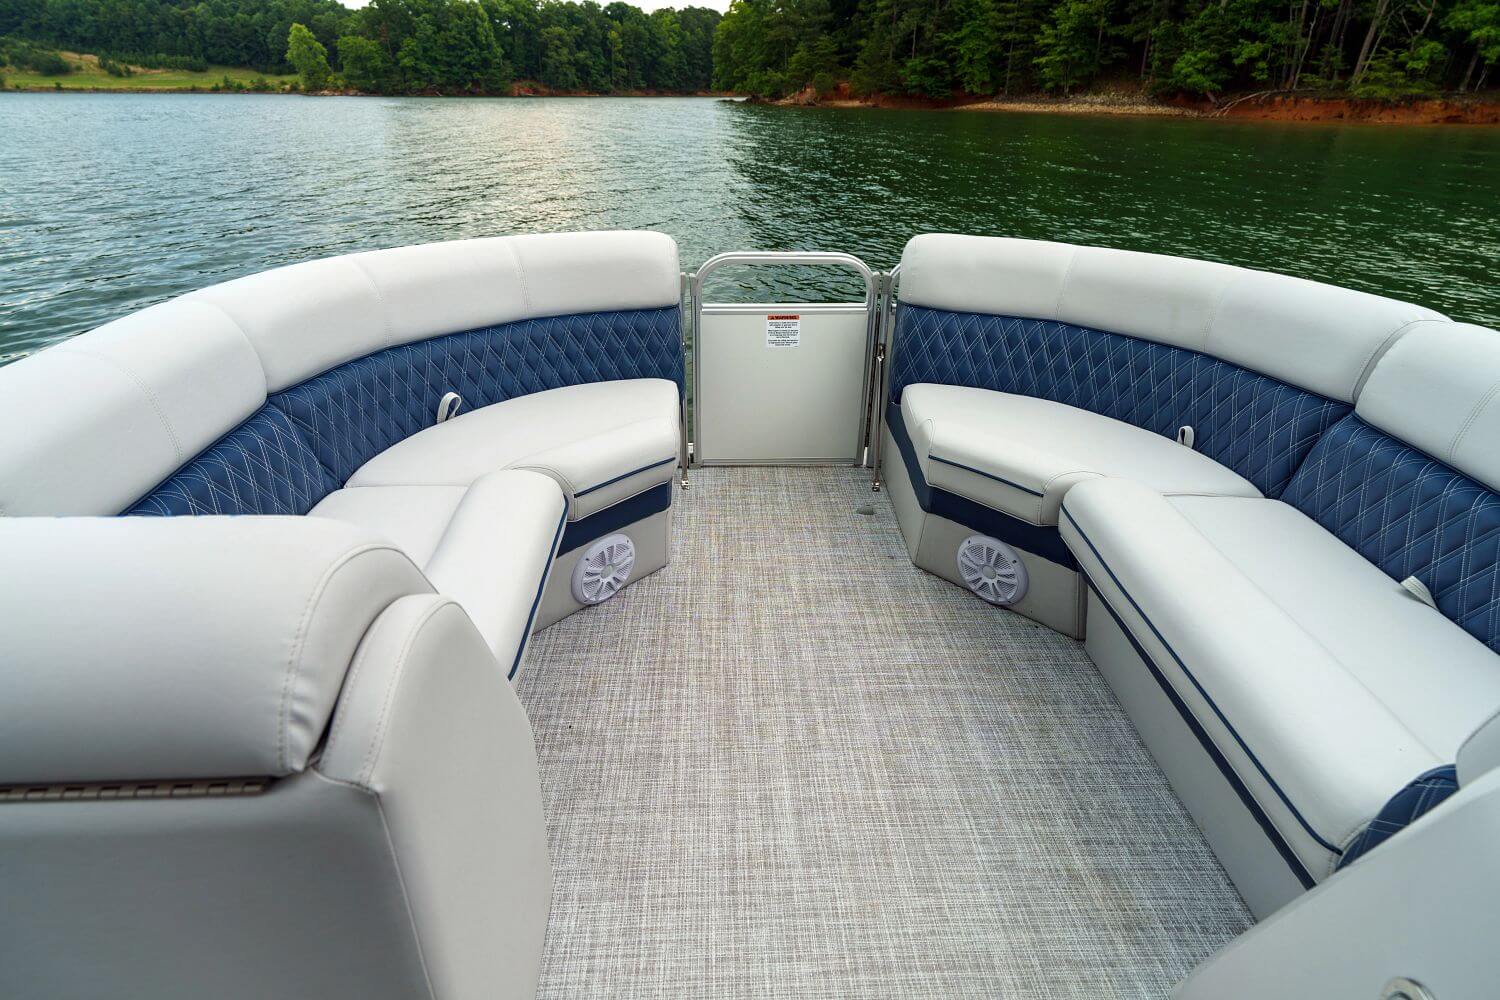 protect-seats-boat-sun-protection-tips-04-2022